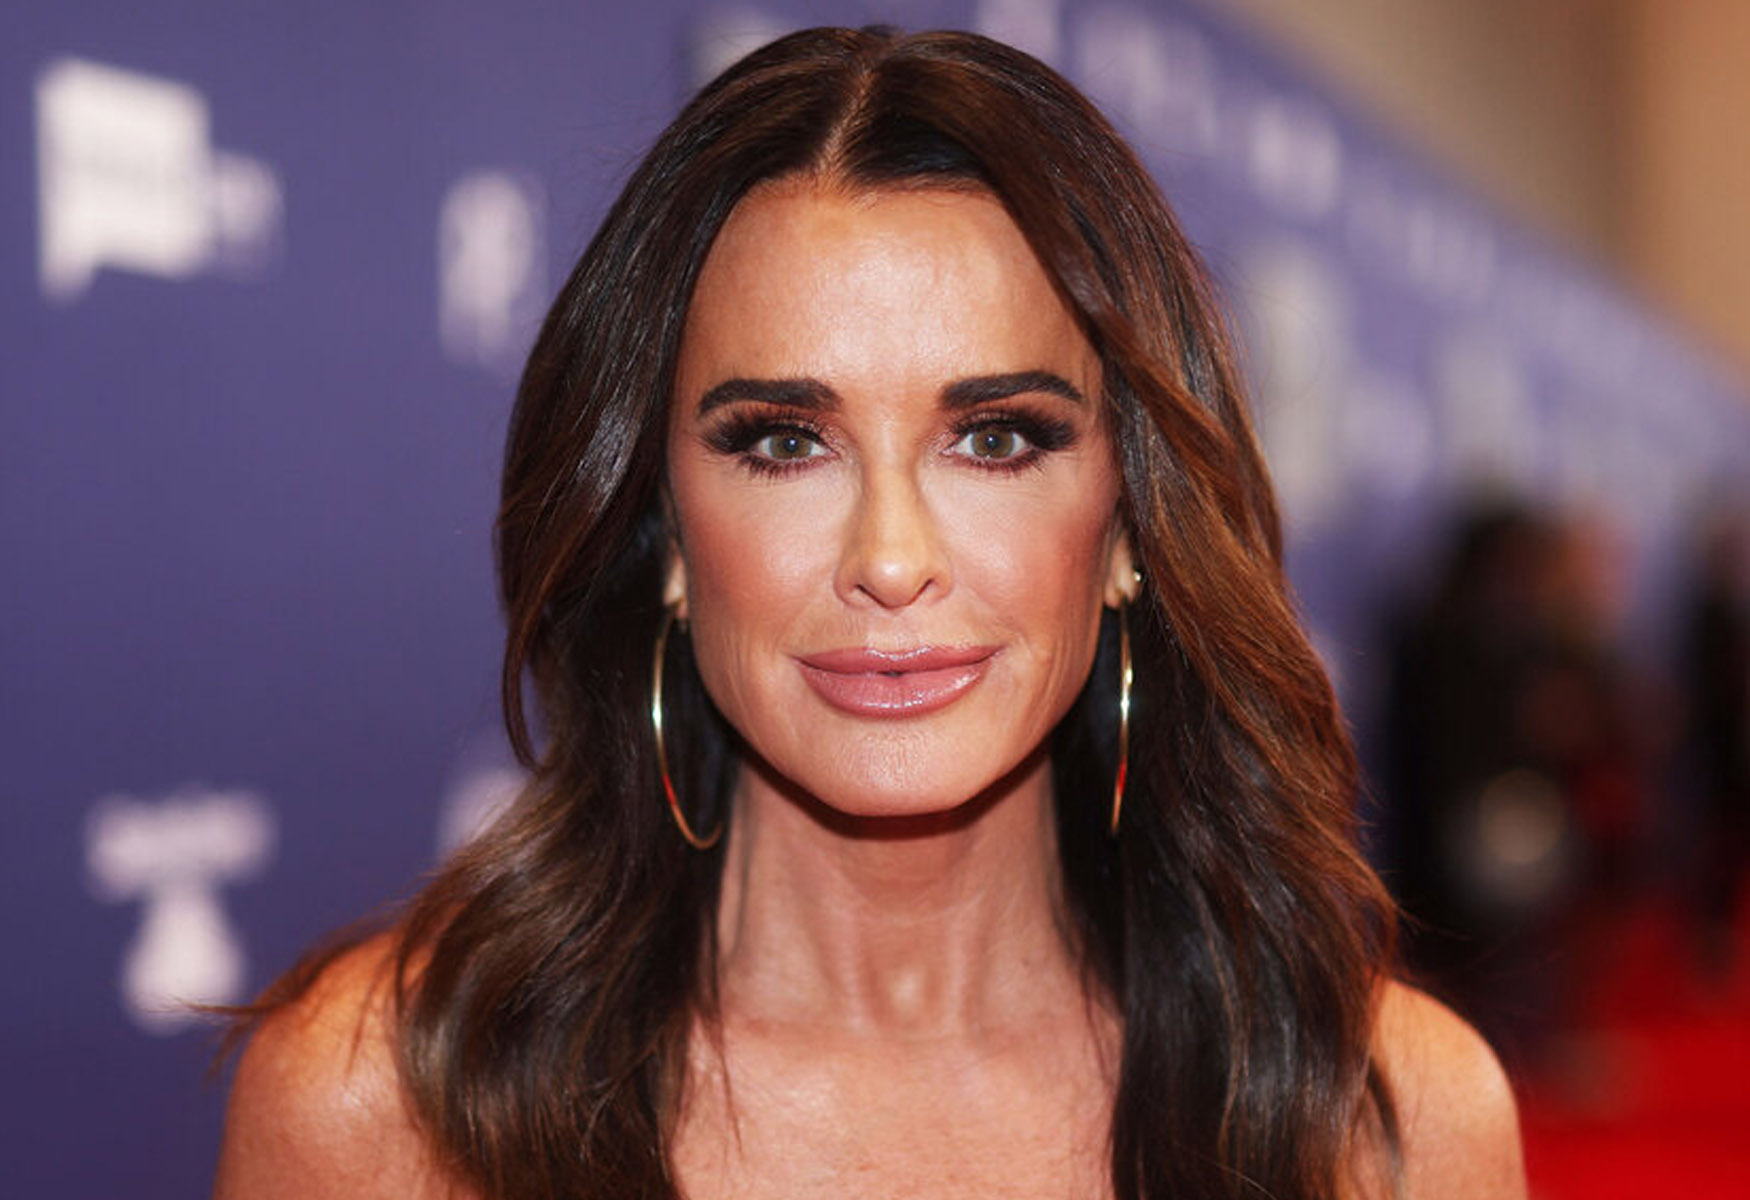 Kyle Richards Opens Up About Dating Women Amid Separation